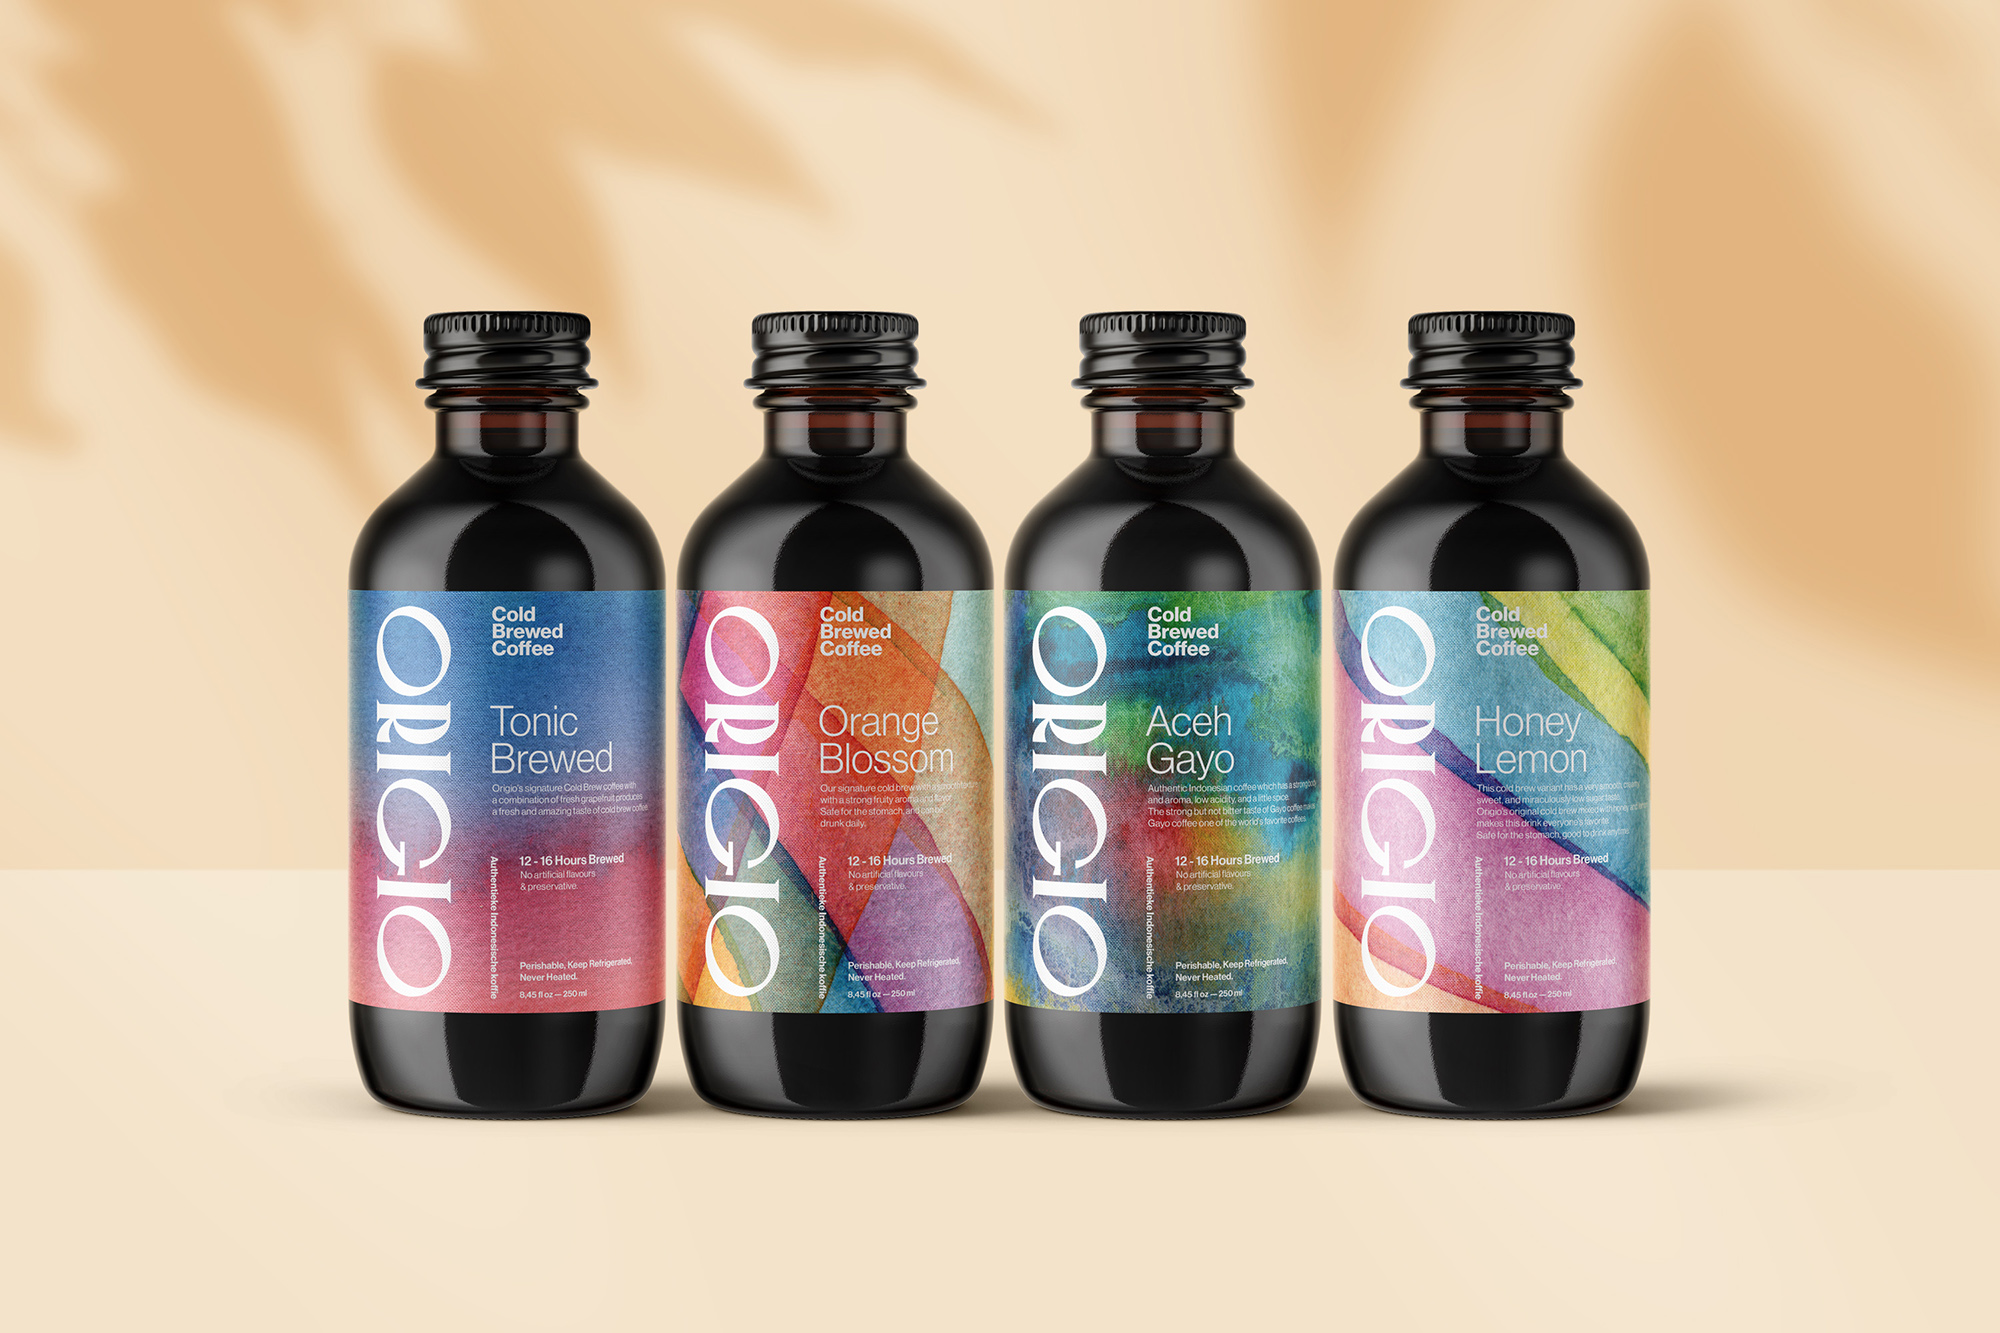 Widarto Impact Create Simplicity and Abstract Labels for Origo Cold Brew